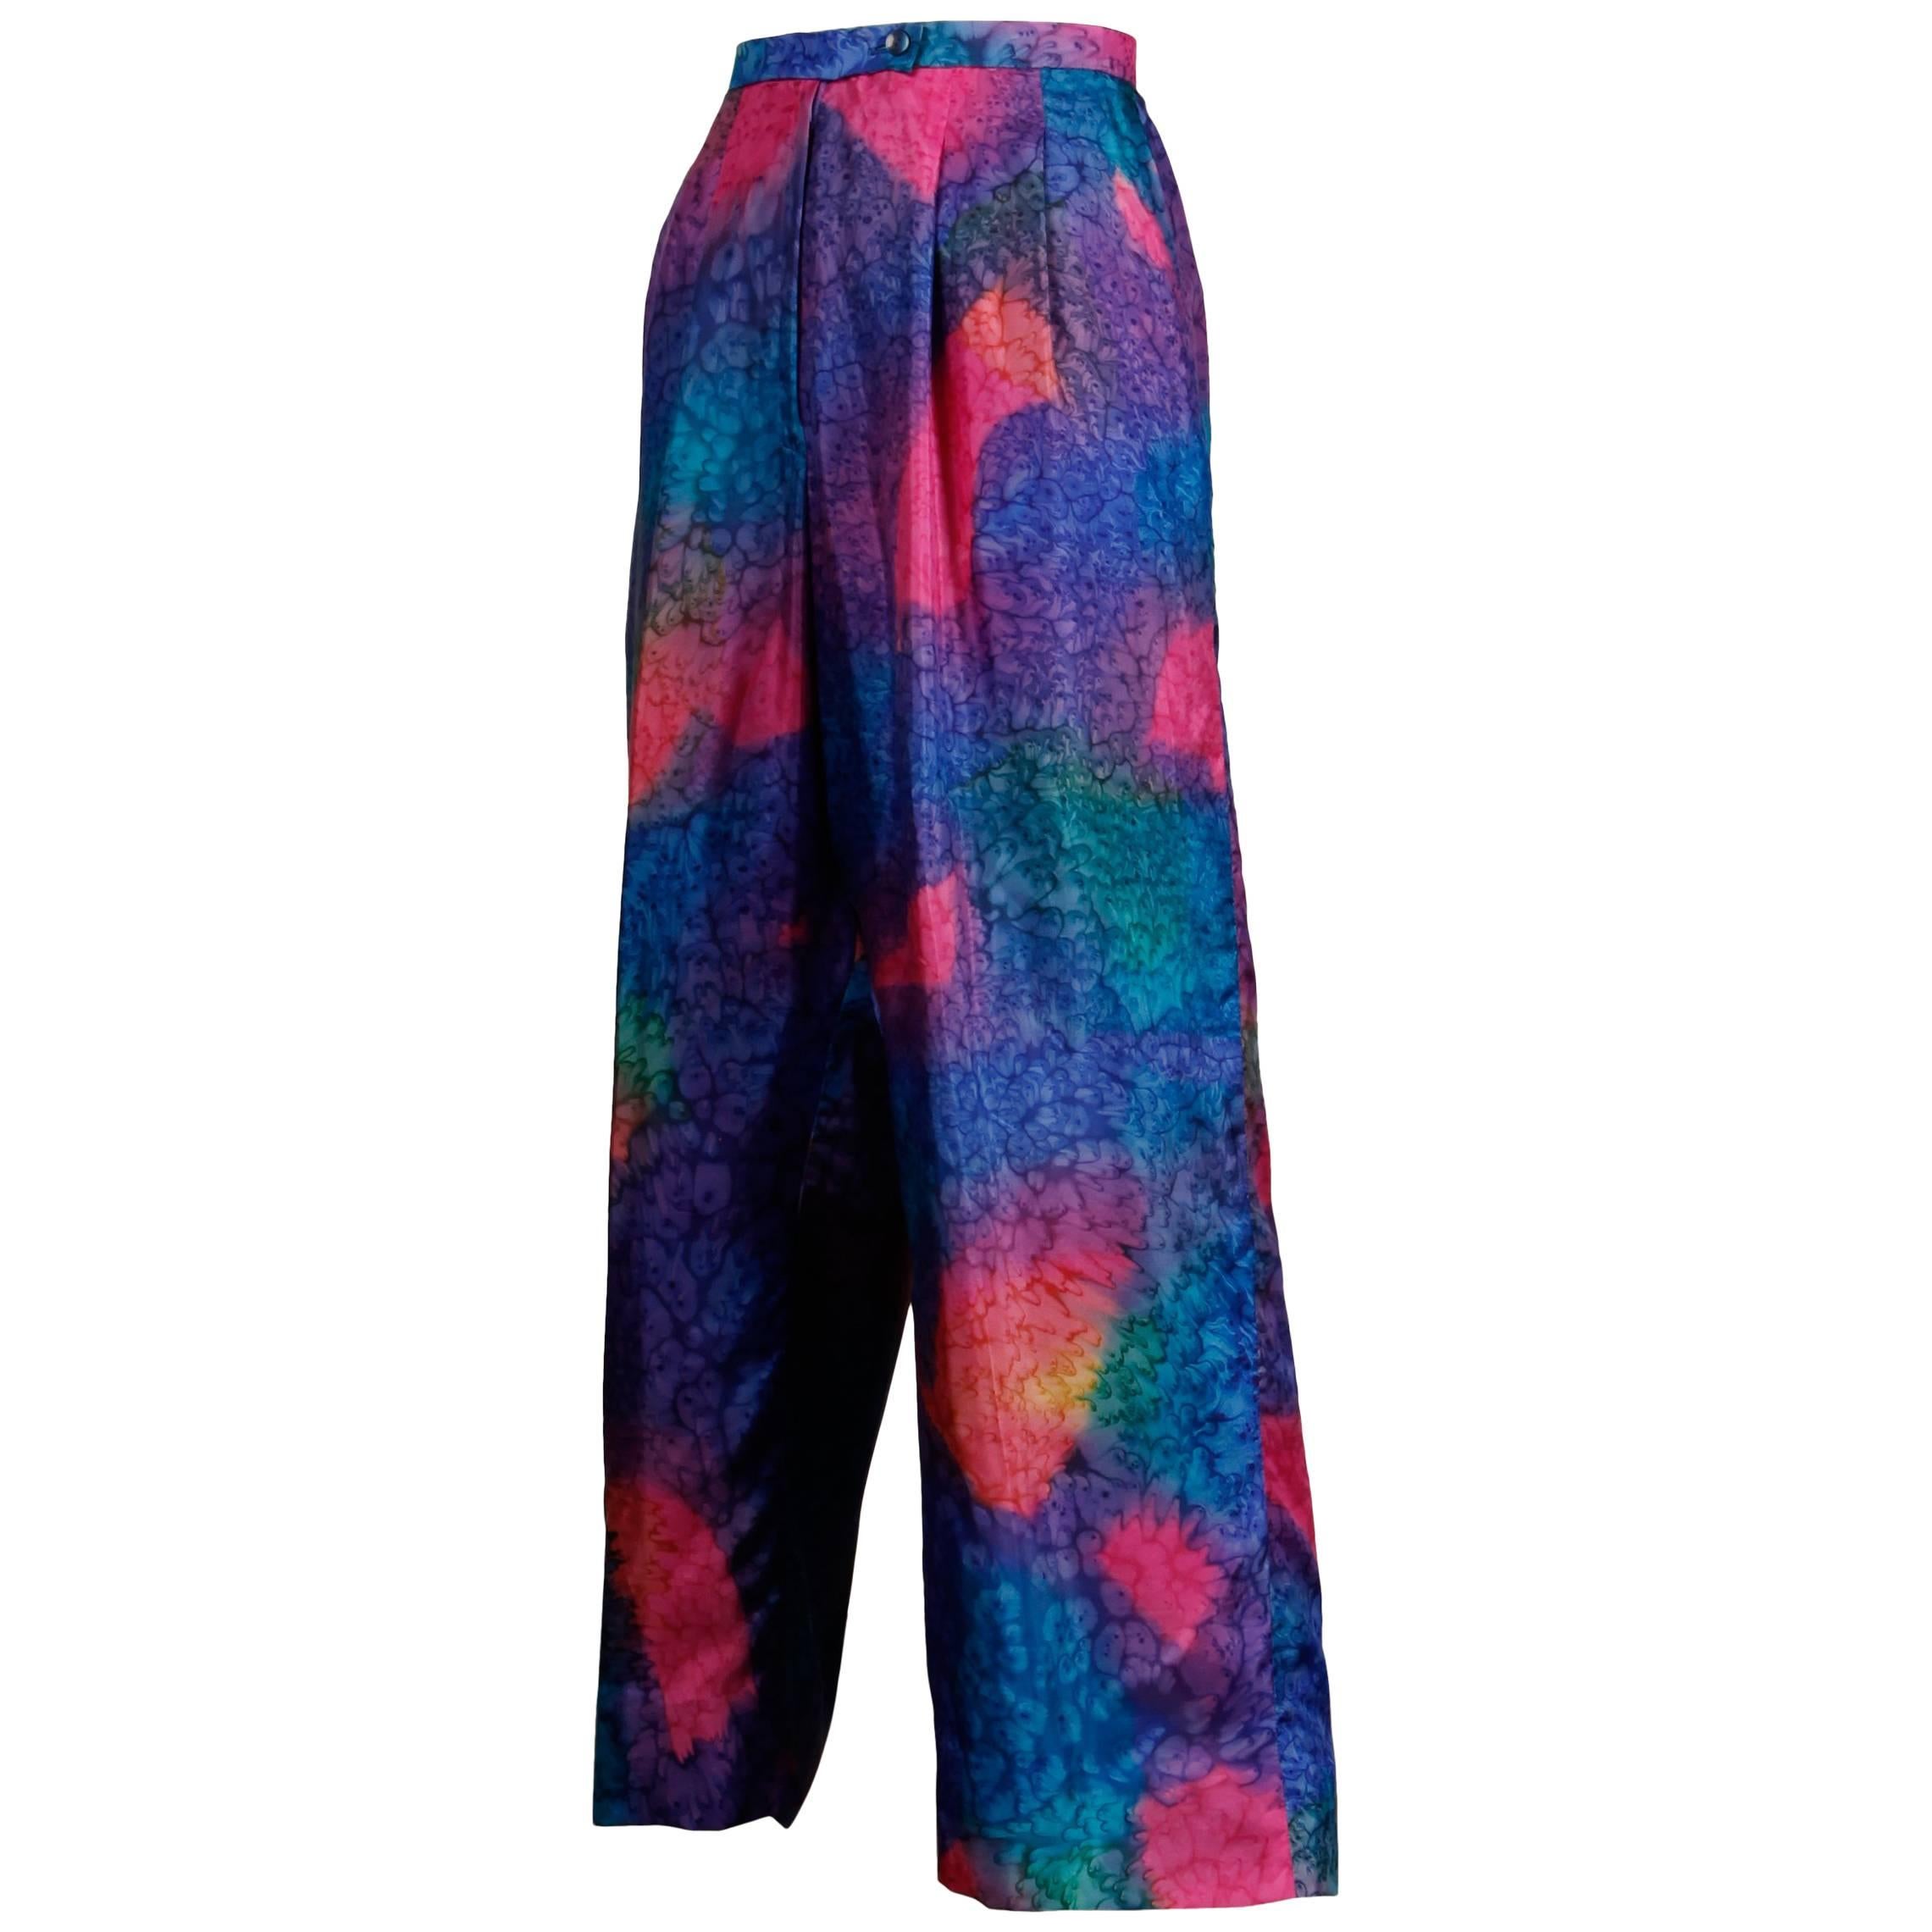 1980s Vintage Hand Dip Dyed Day-Glow Neon Rainbow Cropped Silk Trousers or Pants